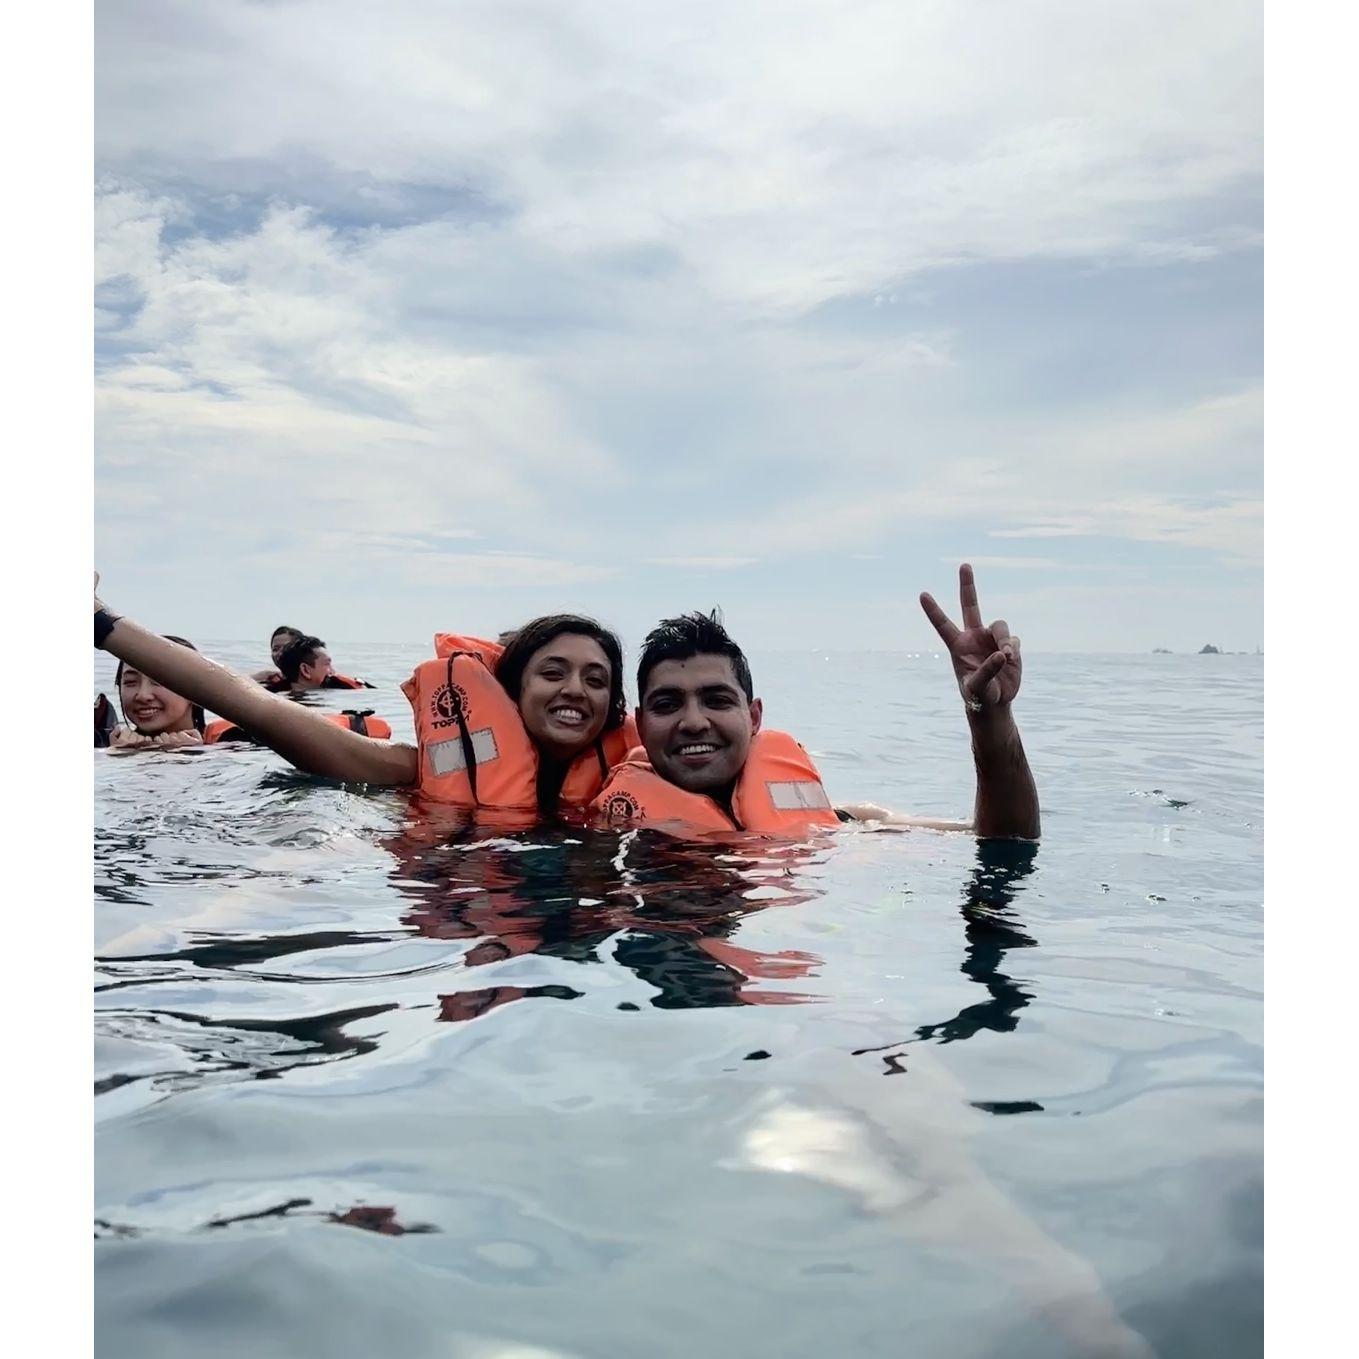 Taking a little boat ride around Phuket - Yash thought it was a good idea to bring his phone in the water (surprise.. it actually worked!)